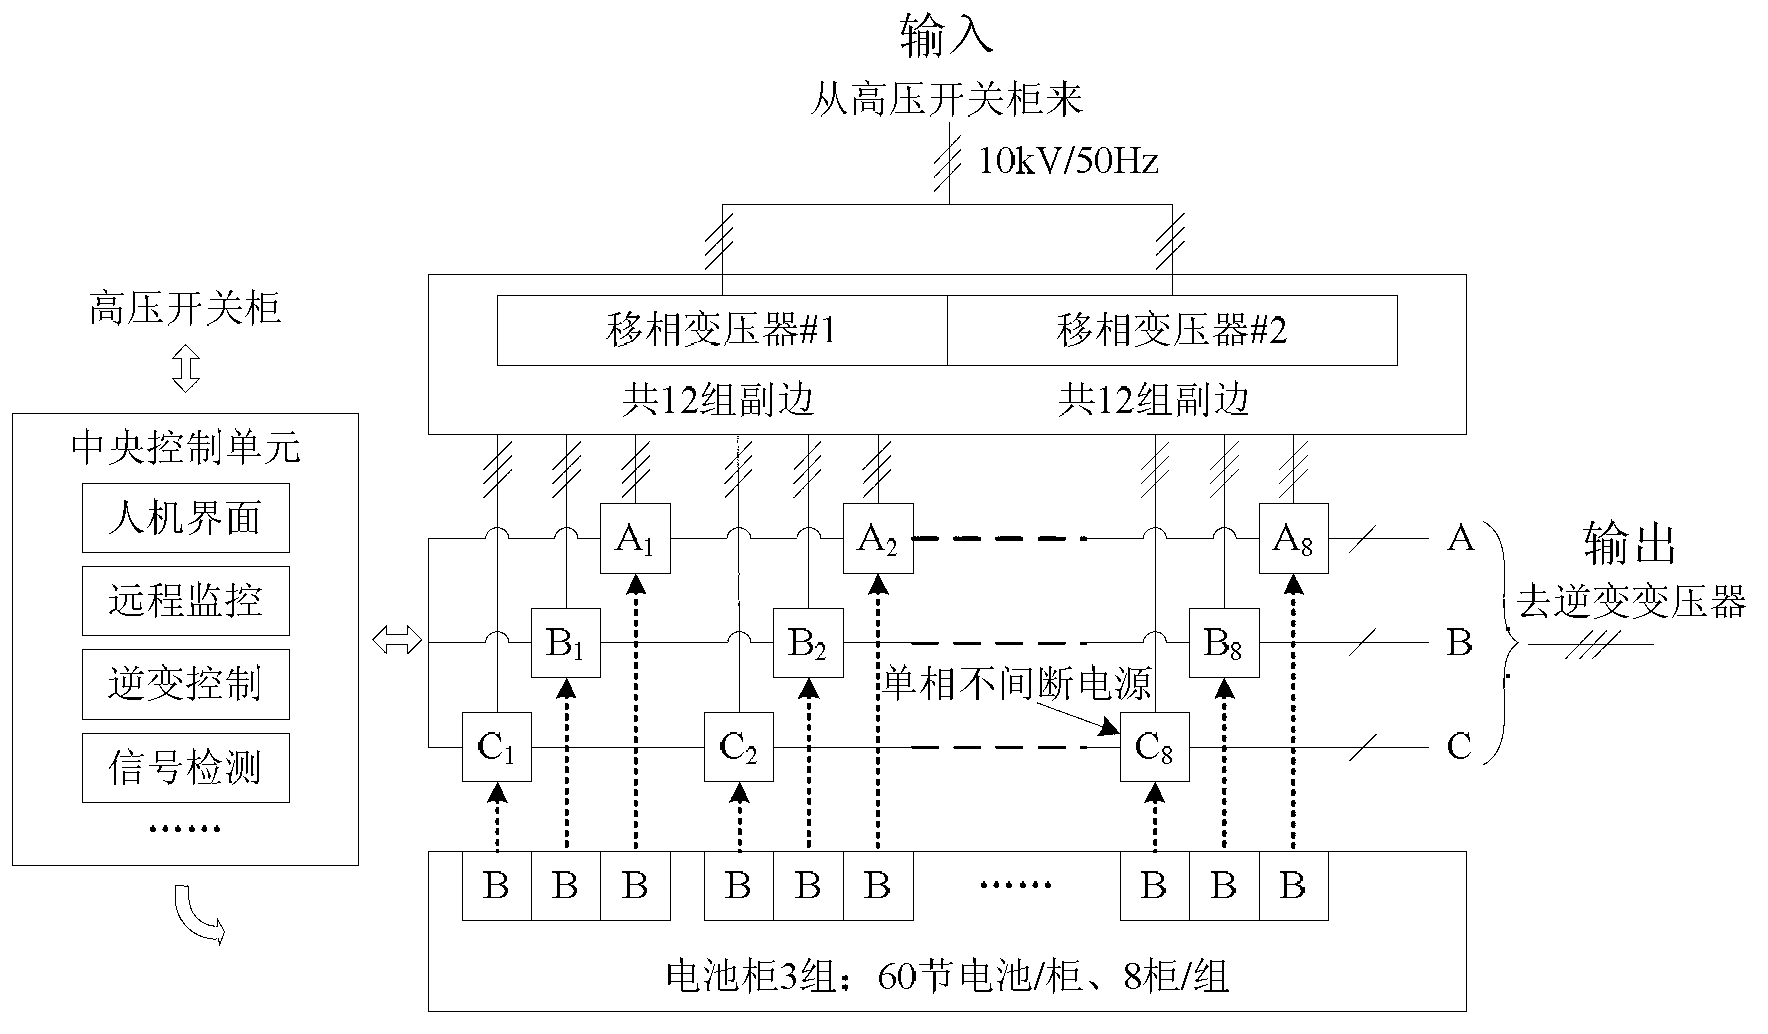 High-voltage and high-power uninterruptible power supply device